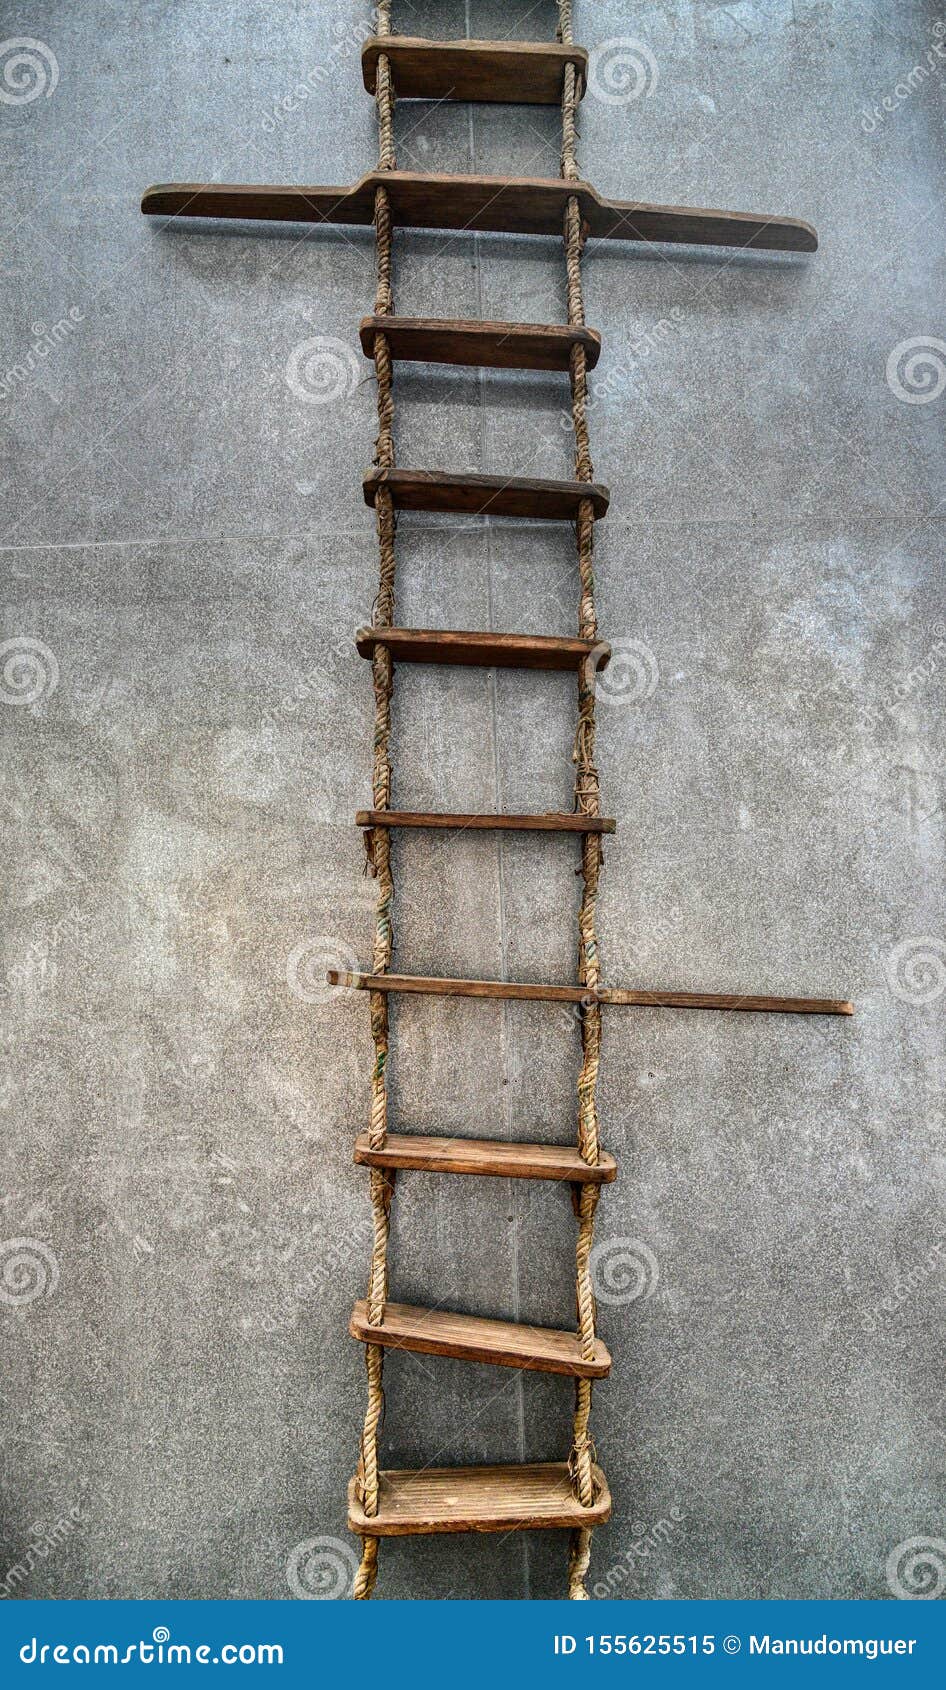 Part of a Ship, Boat Rope Ladder Stock Image - Image of boat